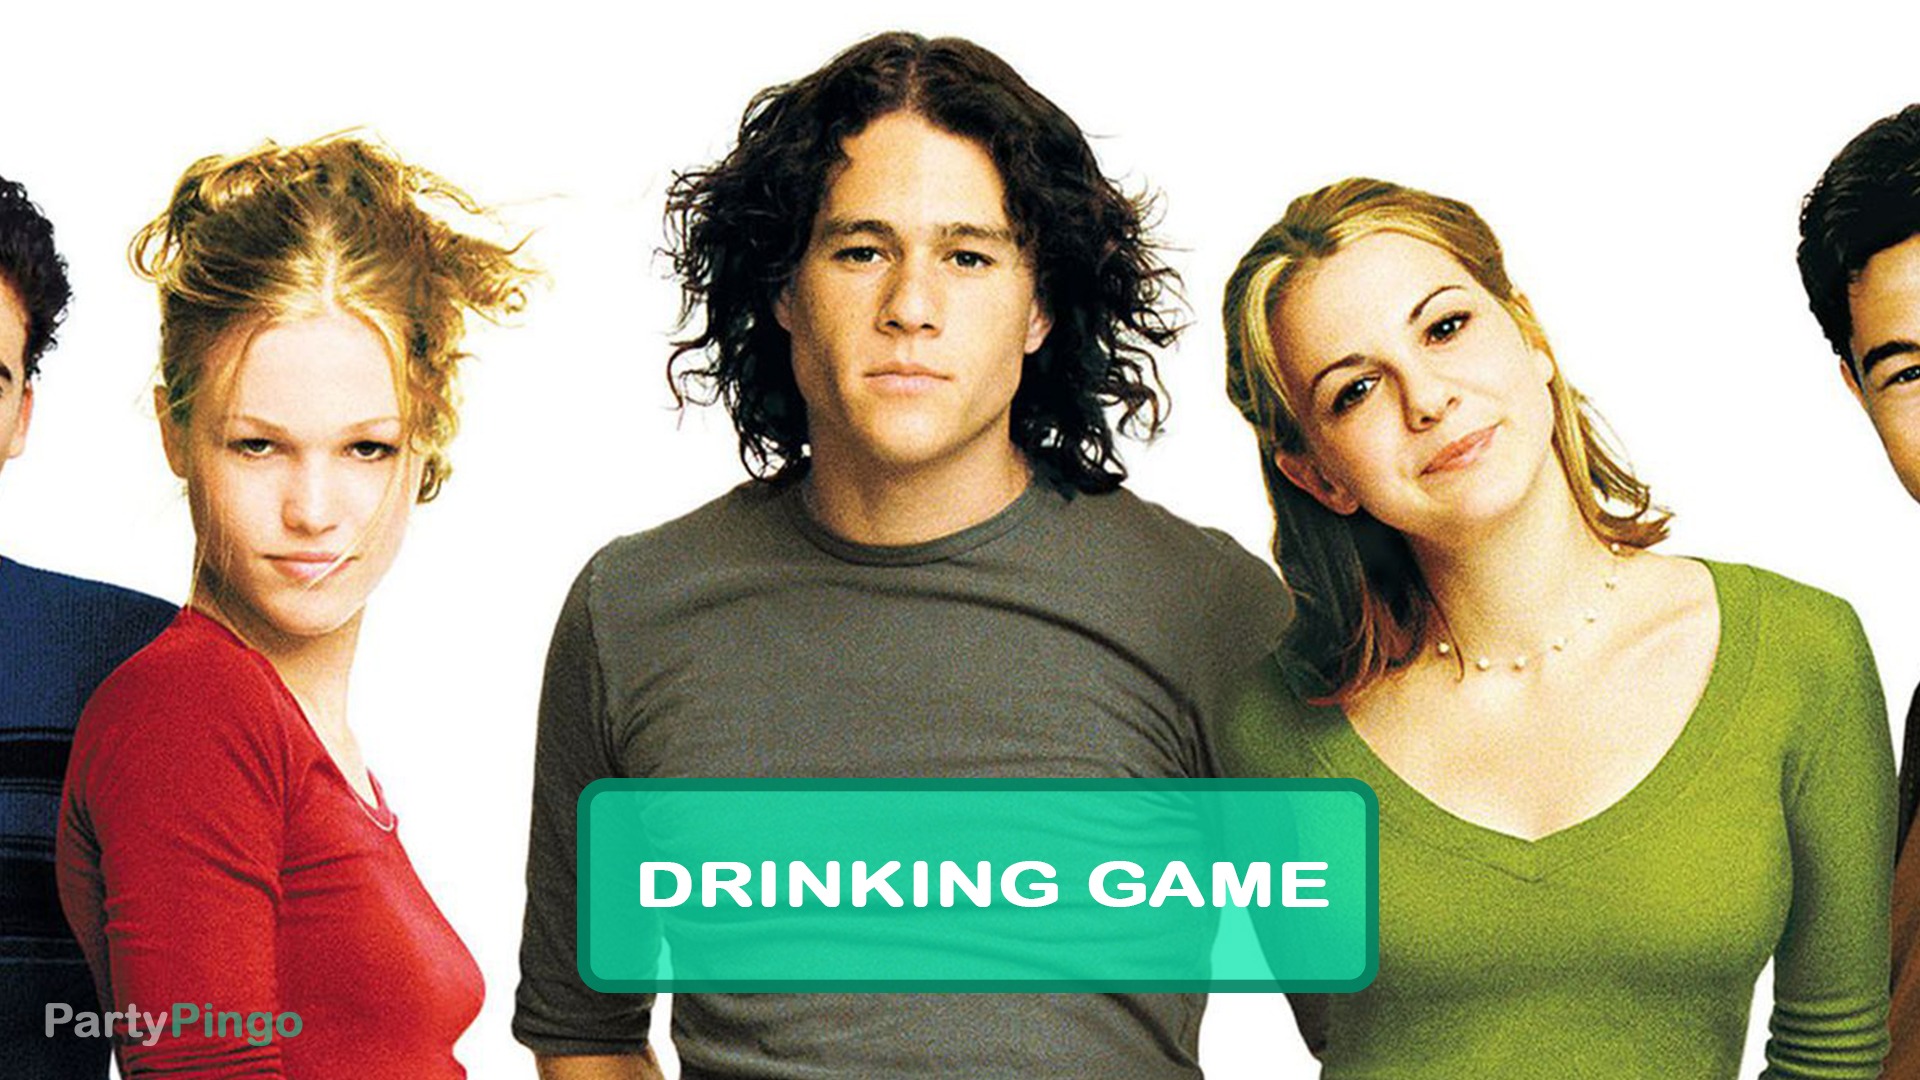 10 Things I hate about you Drinking Game